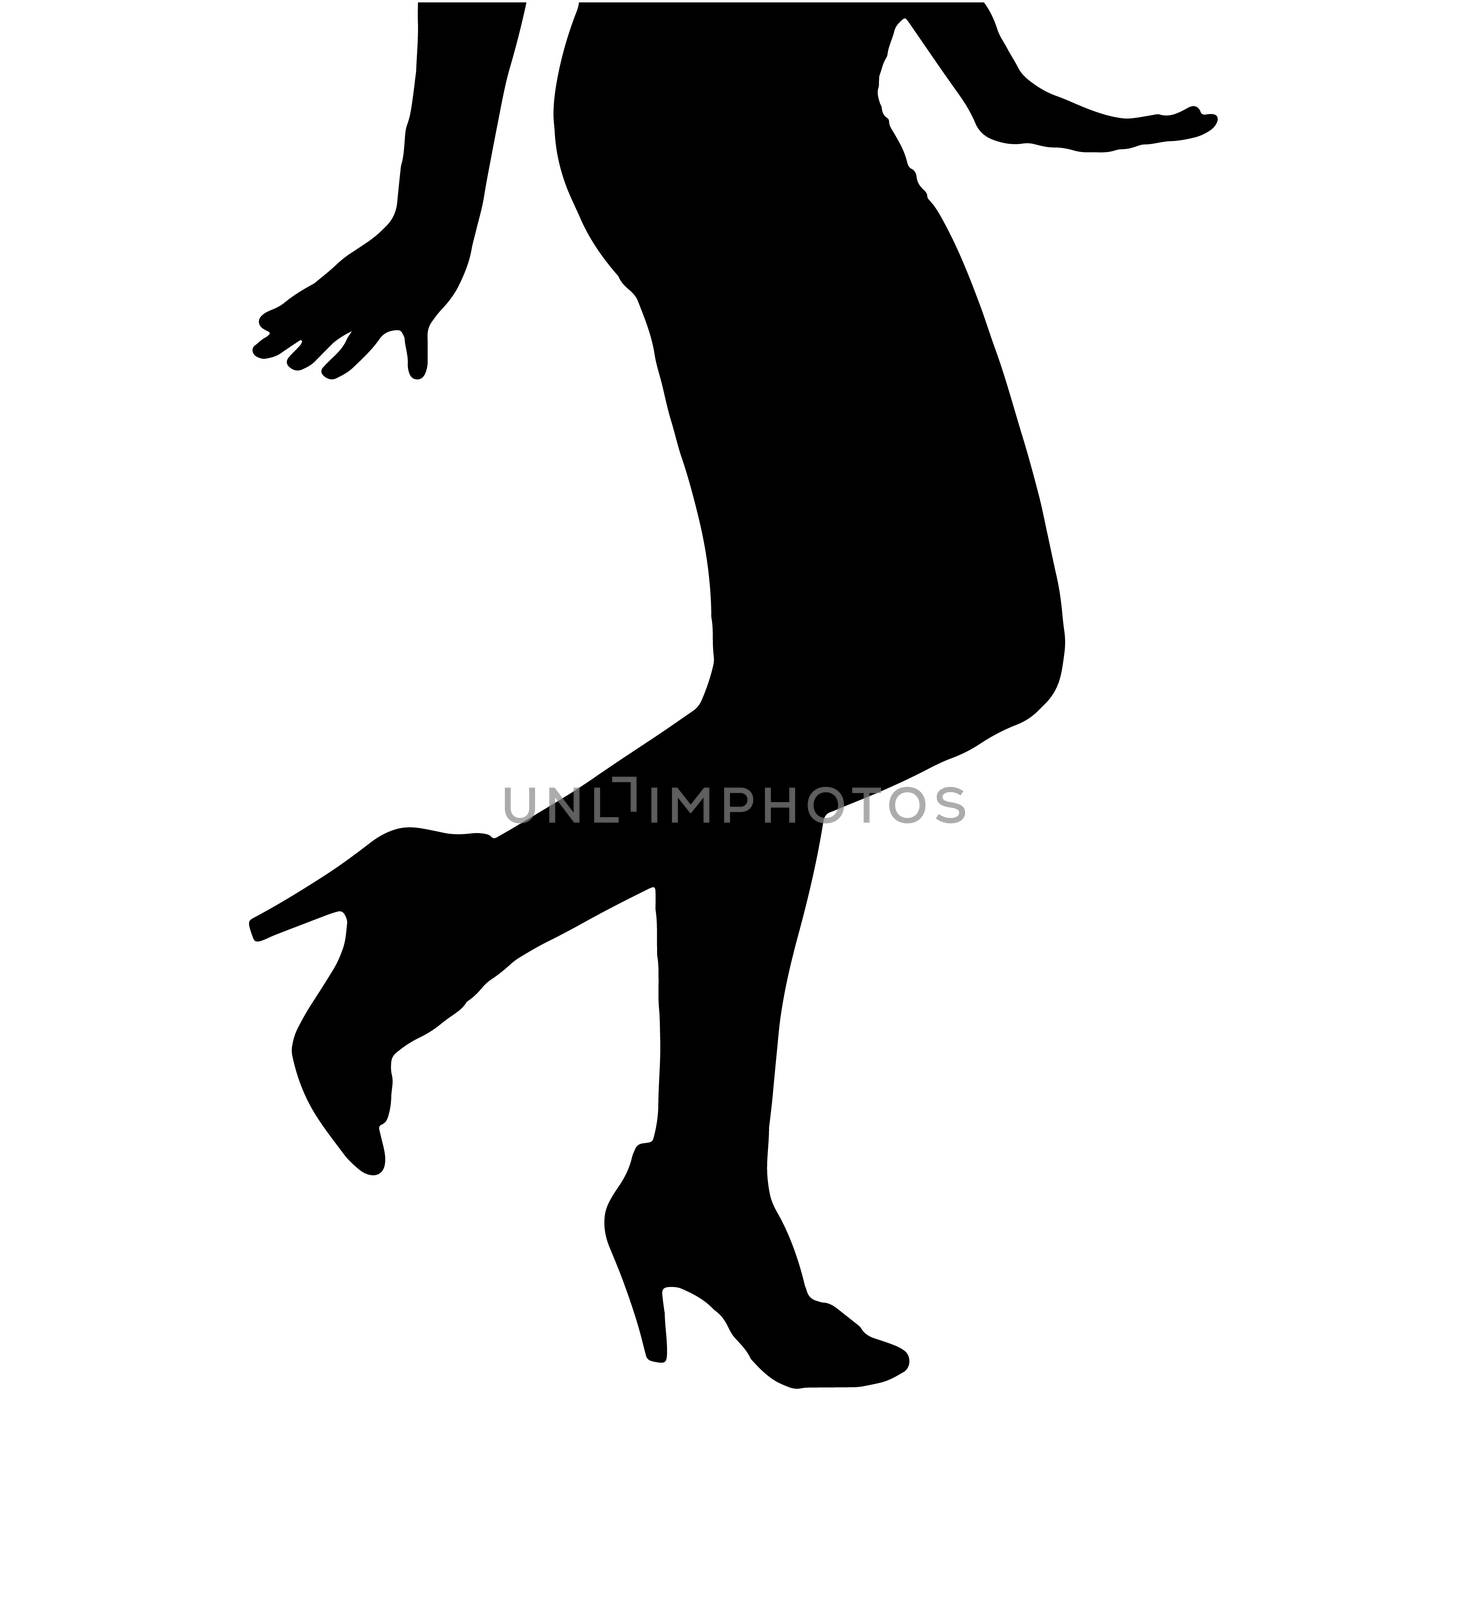 Beautiful Female Torso Perfect Shoes Dancing Joyfully by ChrisBoswell